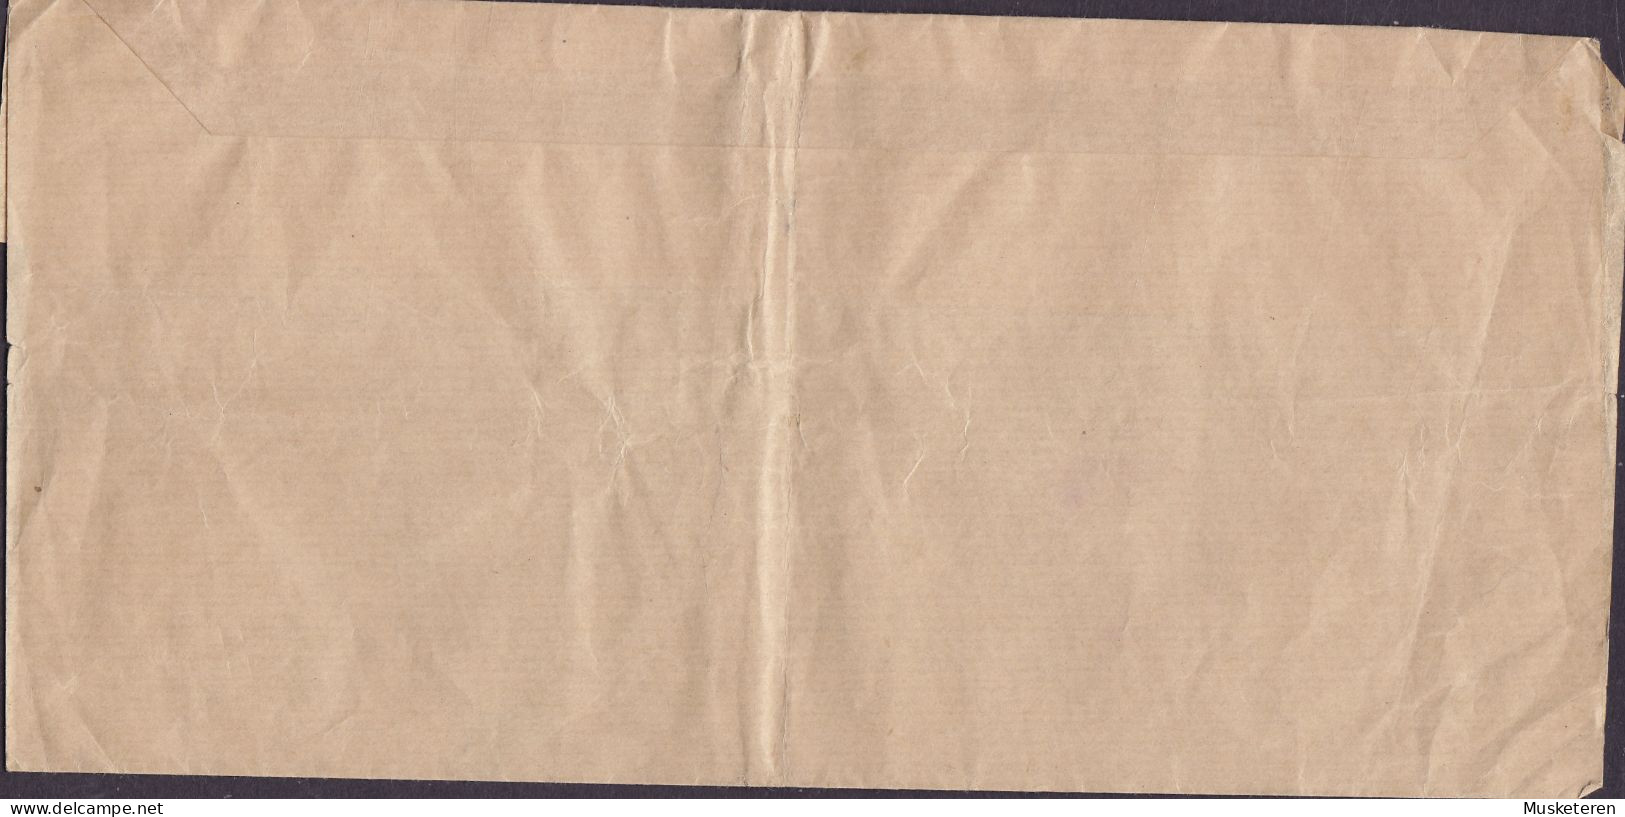 Great Britain Postal Stationery Ganzsache Wrapper Streifband GV PRIVATE Print THE STOCK EXCHANGE DAILY LIST, LONDON 1930 - Material Postal